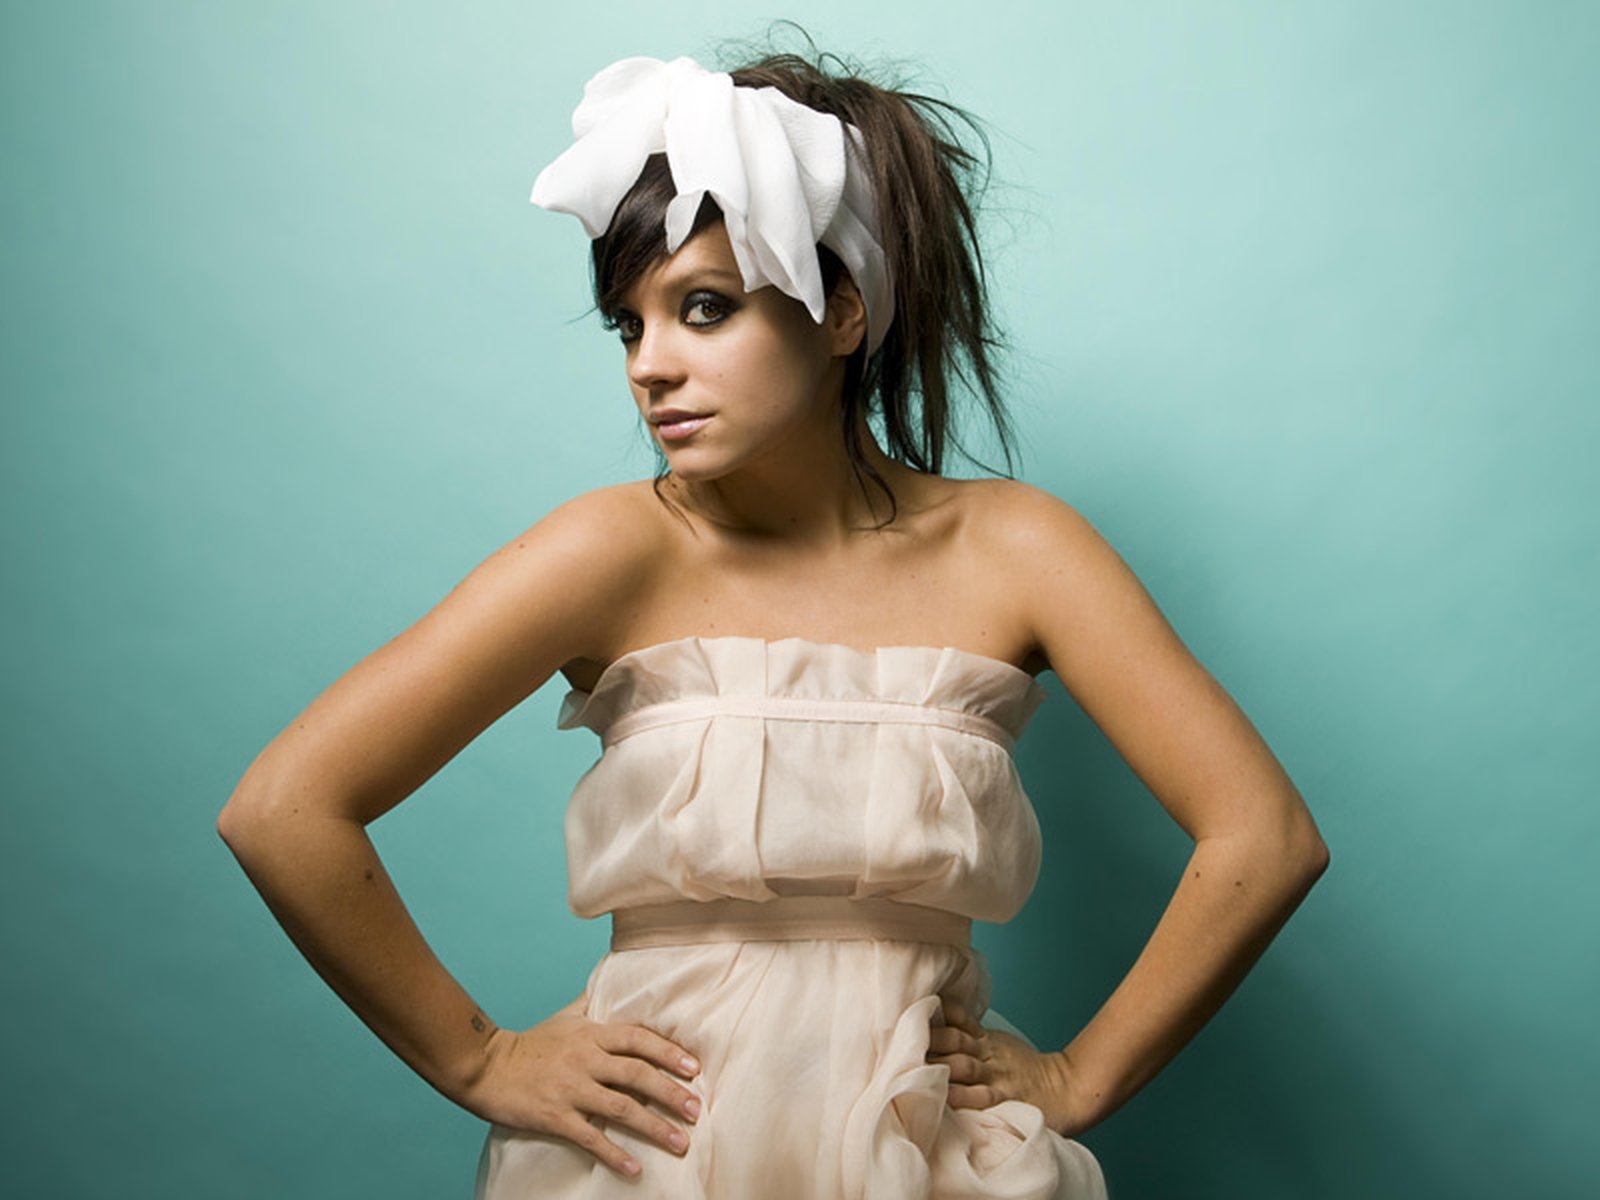 Lily Allen Talks About Her Love Life